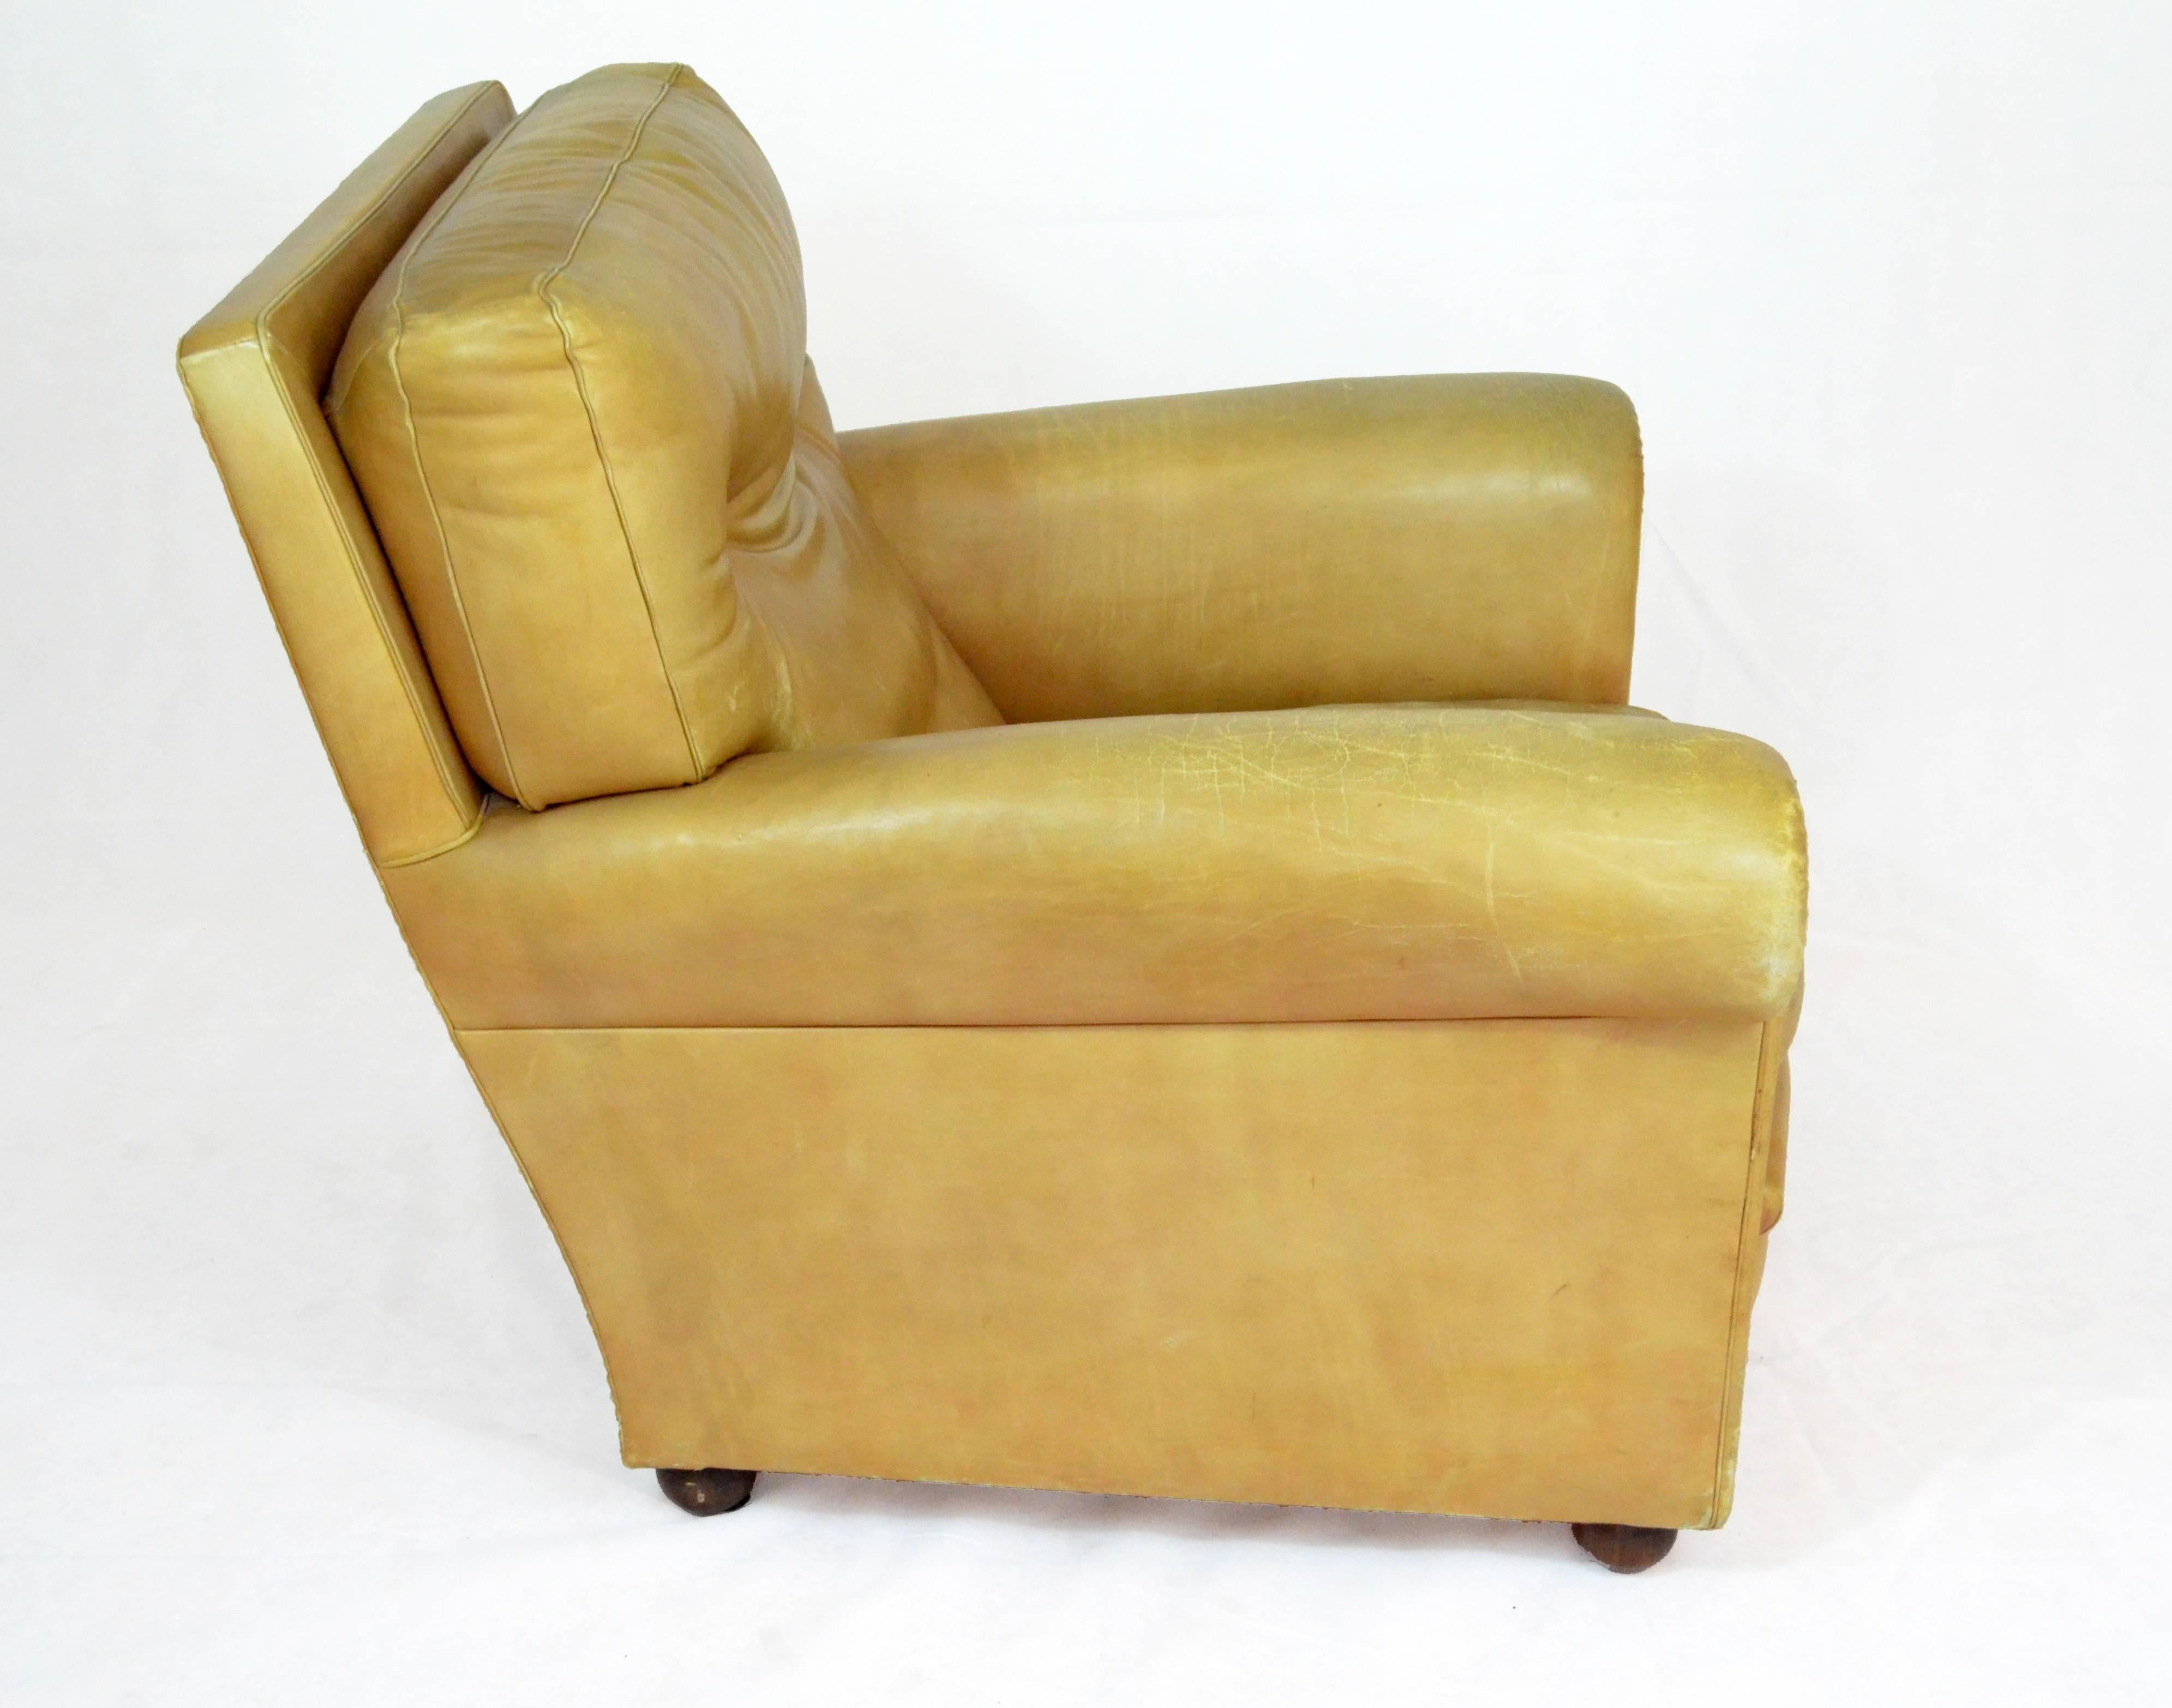 Vintage club armchair signed and marked Poltrona Frau. Model “Edoardo” from 1962.
The leather, which is cognac color, is in very good vintage condition coherent with age and prior use. We have done a conservative restoration aimed at smoothing the